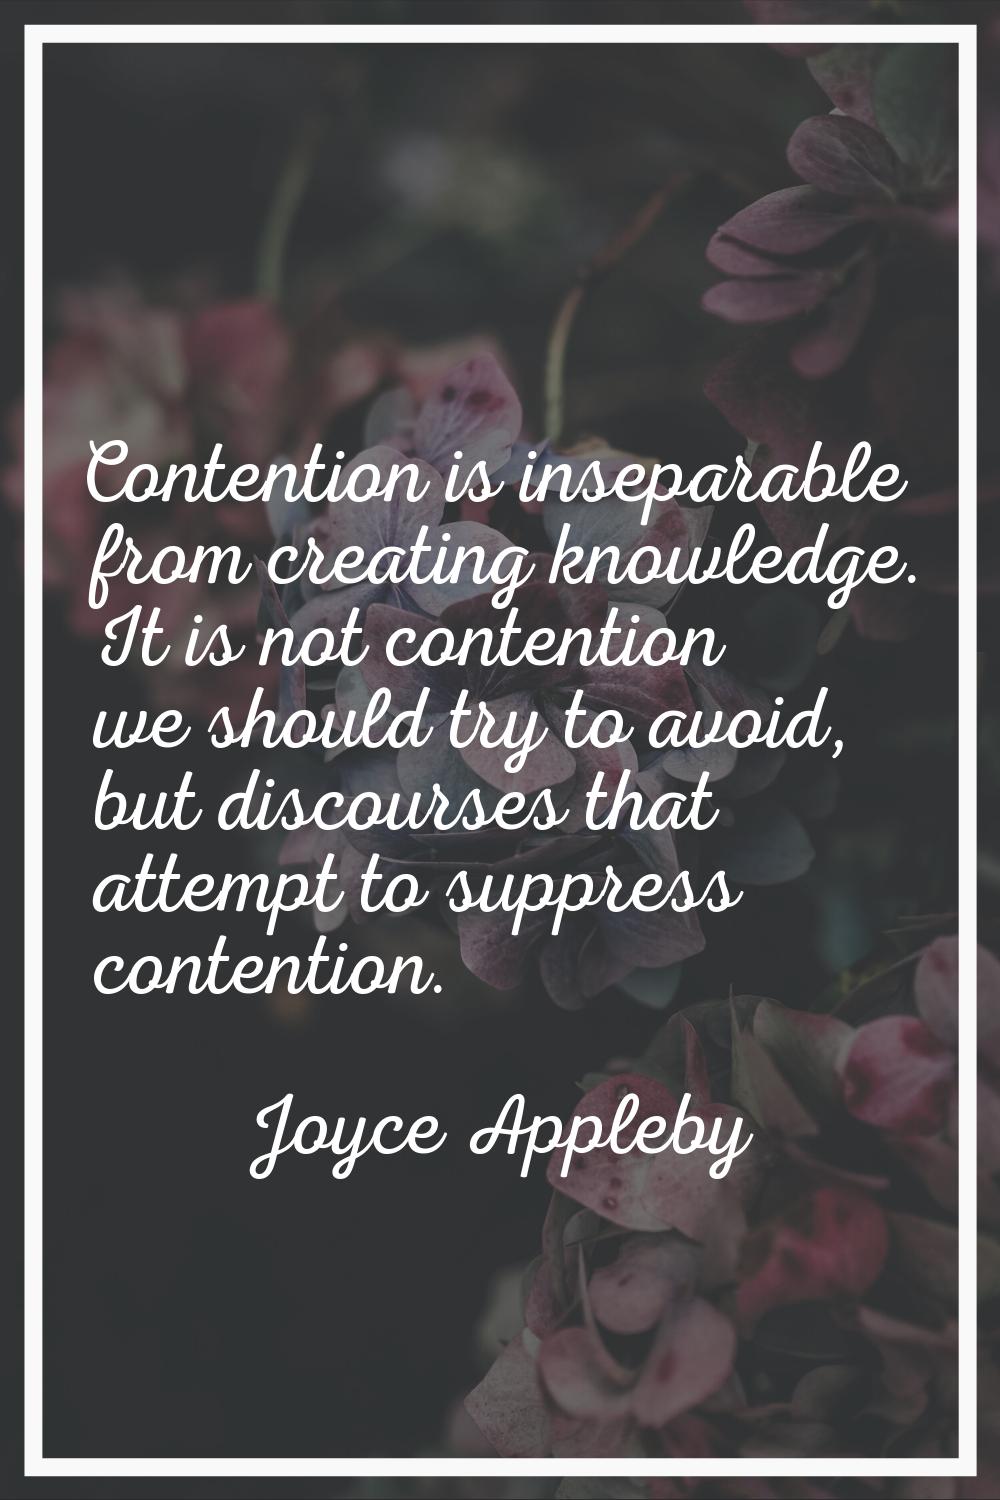 Contention is inseparable from creating knowledge. It is not contention we should try to avoid, but